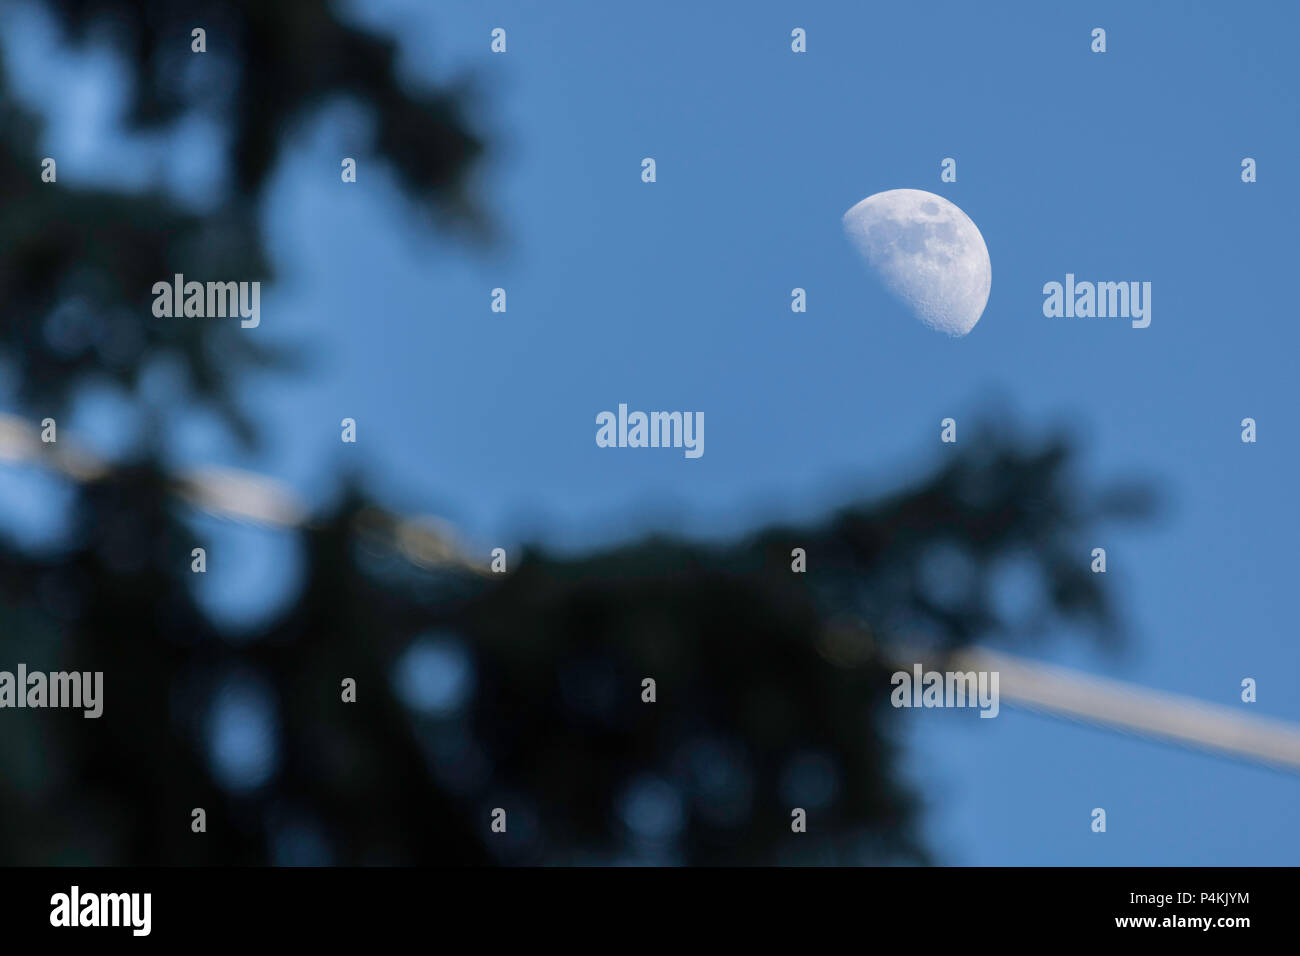 Half moon on a clear sky over trees, Mississauga, Ontario, Canada Stock Photo